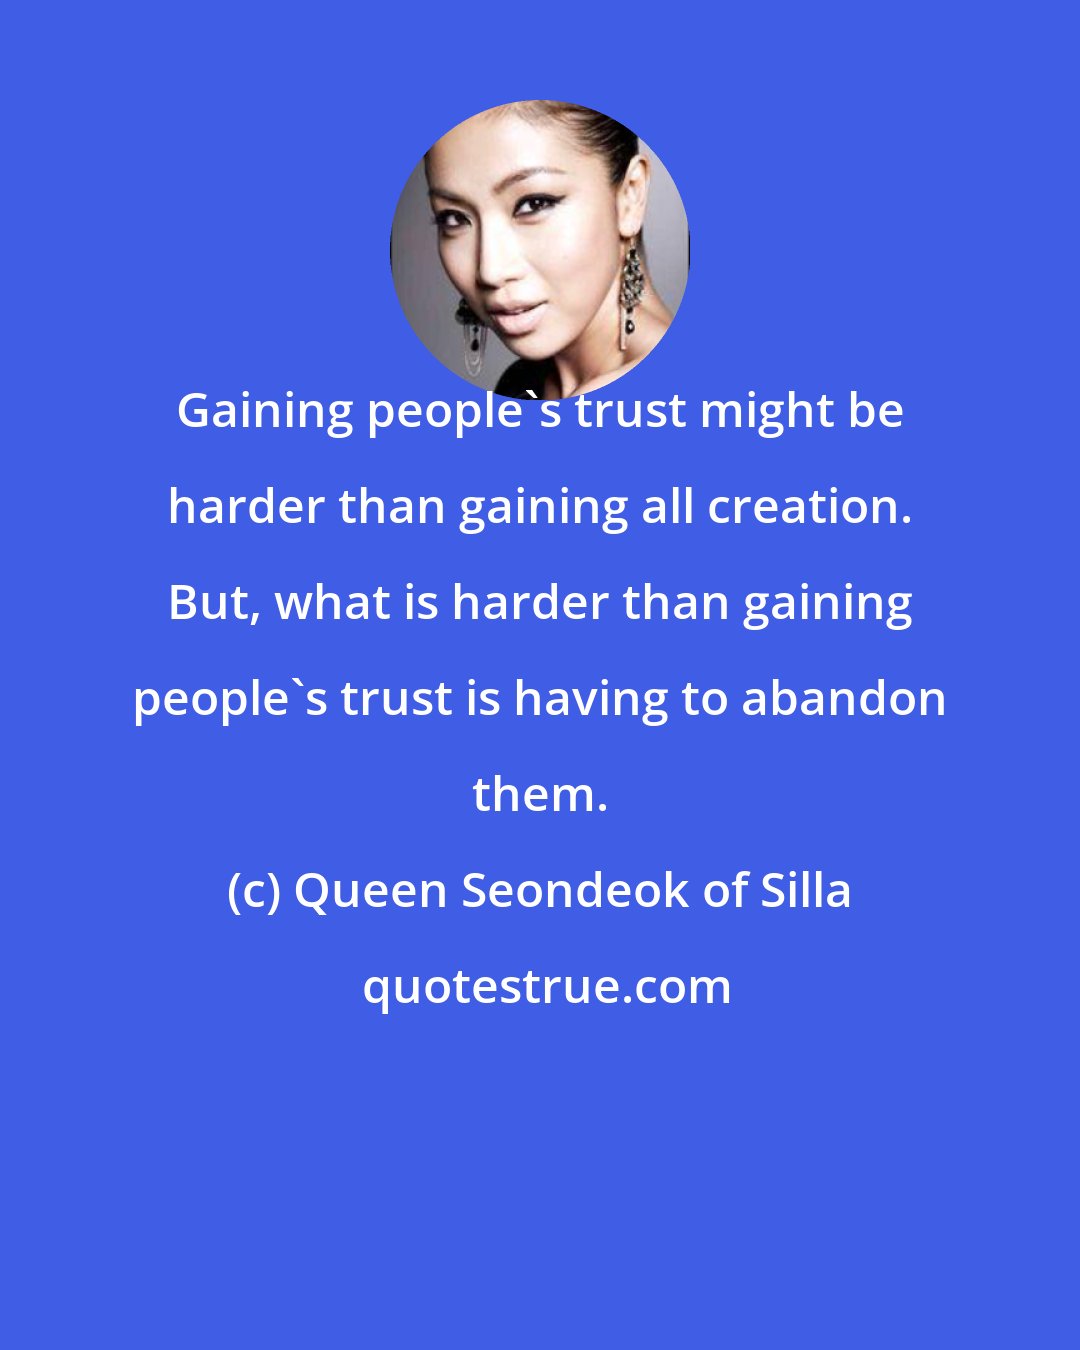 Queen Seondeok of Silla: Gaining people's trust might be harder than gaining all creation. But, what is harder than gaining people's trust is having to abandon them.